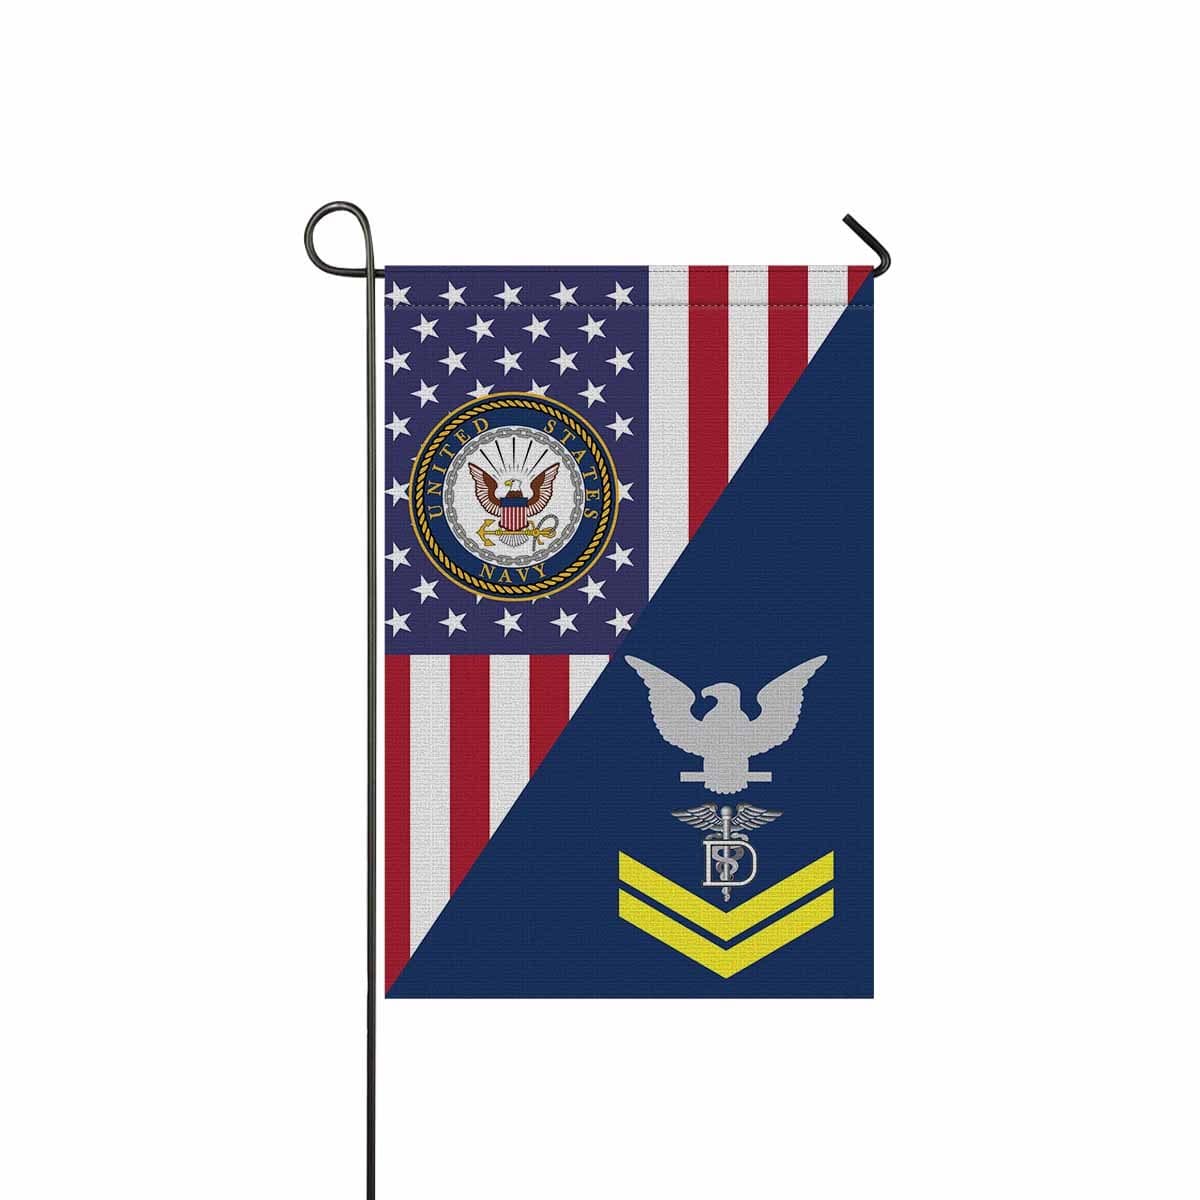 Navy Dental Technician Navy DT E-5 Gold Stripe Garden Flag/Yard Flag 12 inches x 18 inches Twin-Side Printing-GDFlag-Navy-Rating-Veterans Nation